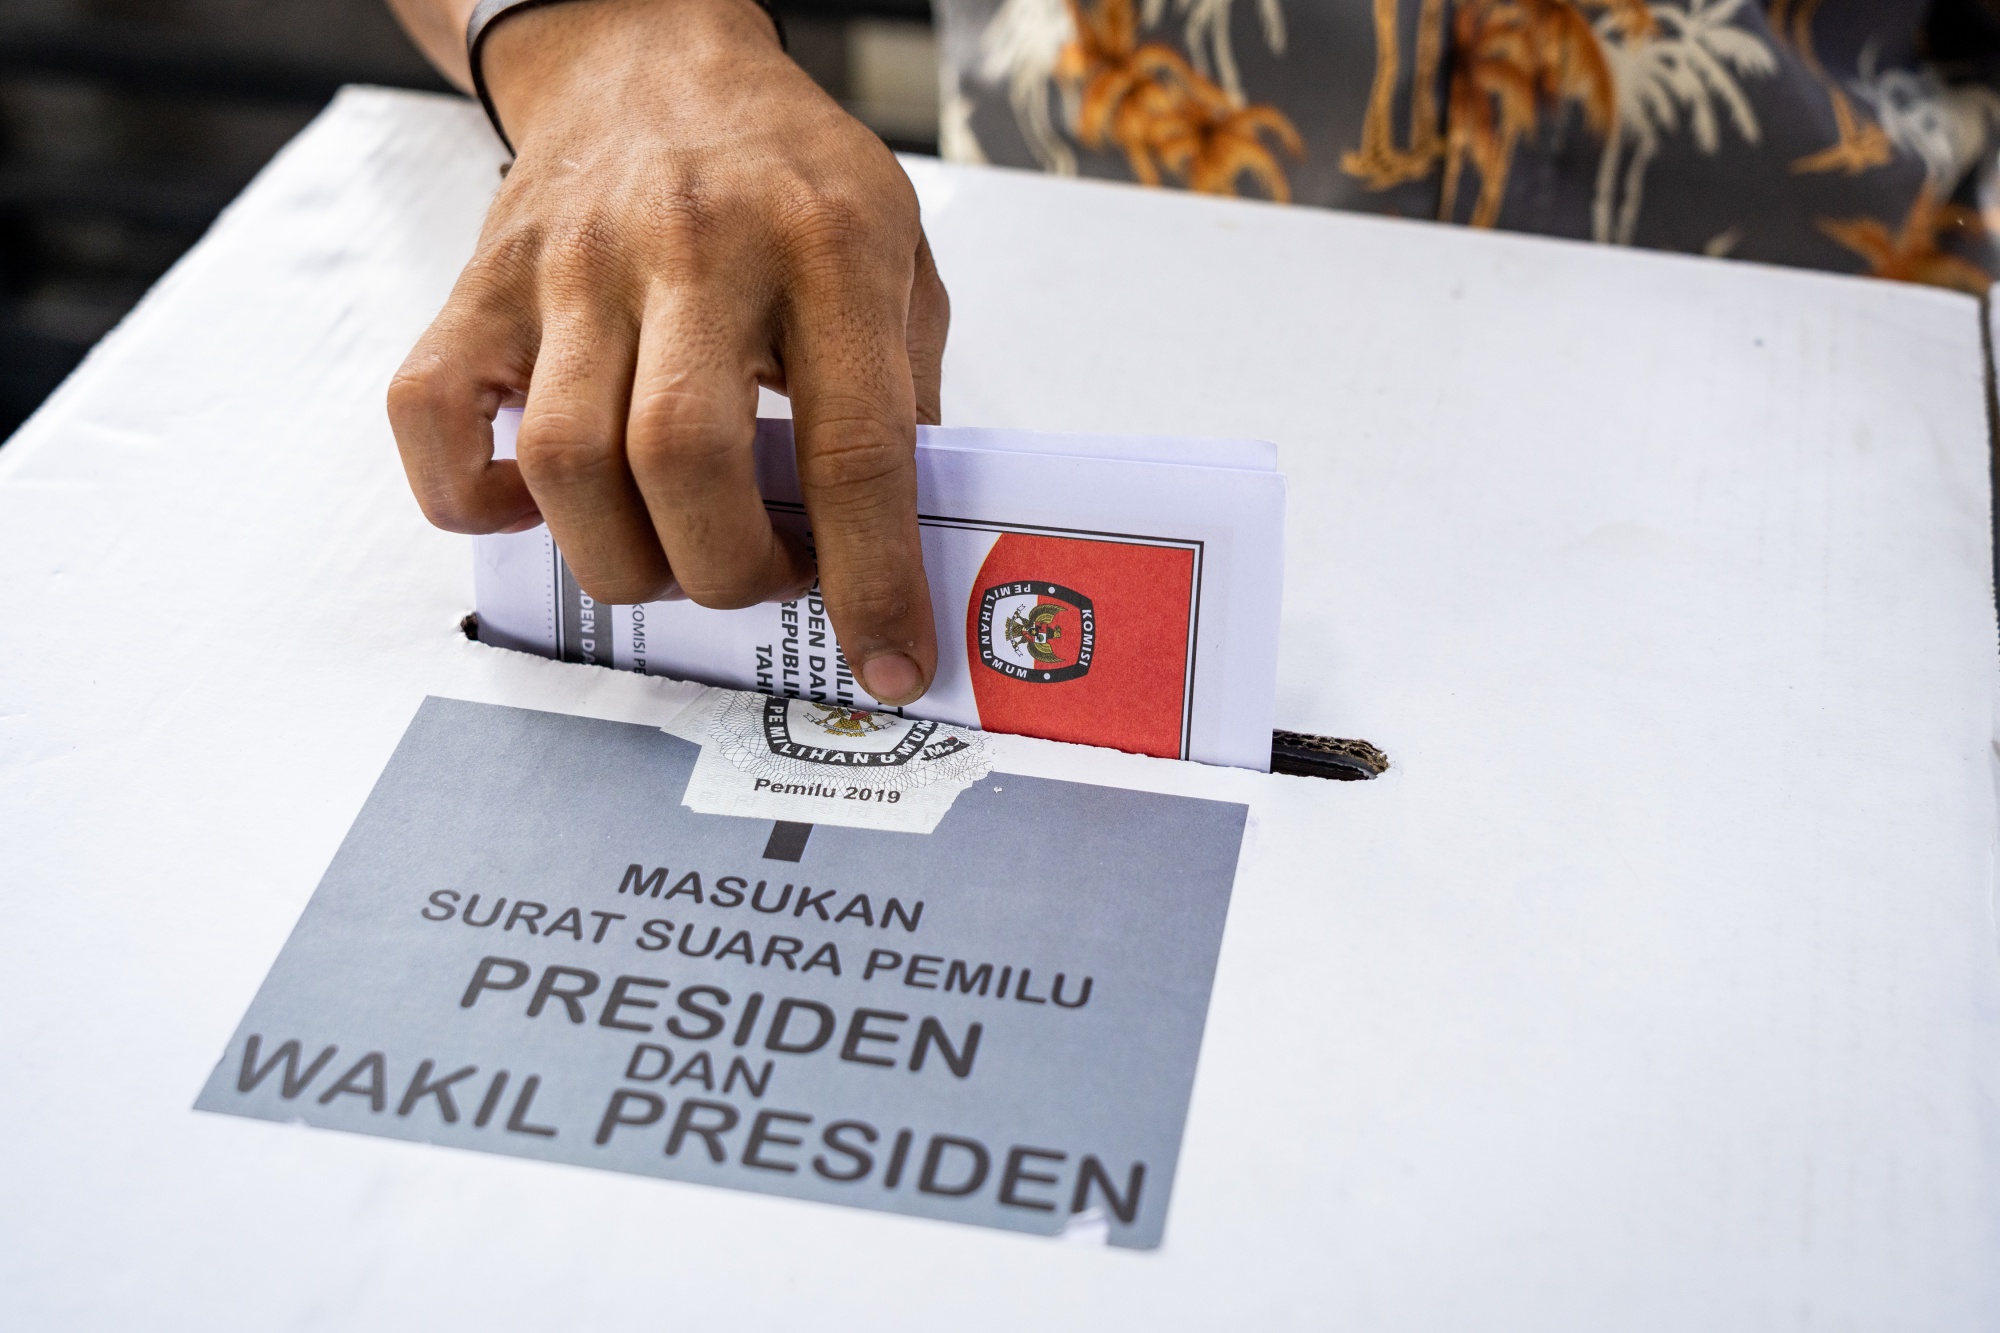 An election official deposits a voter's ballot into a box at a polling station during the general election in Bogor, West Java, Indonesia.